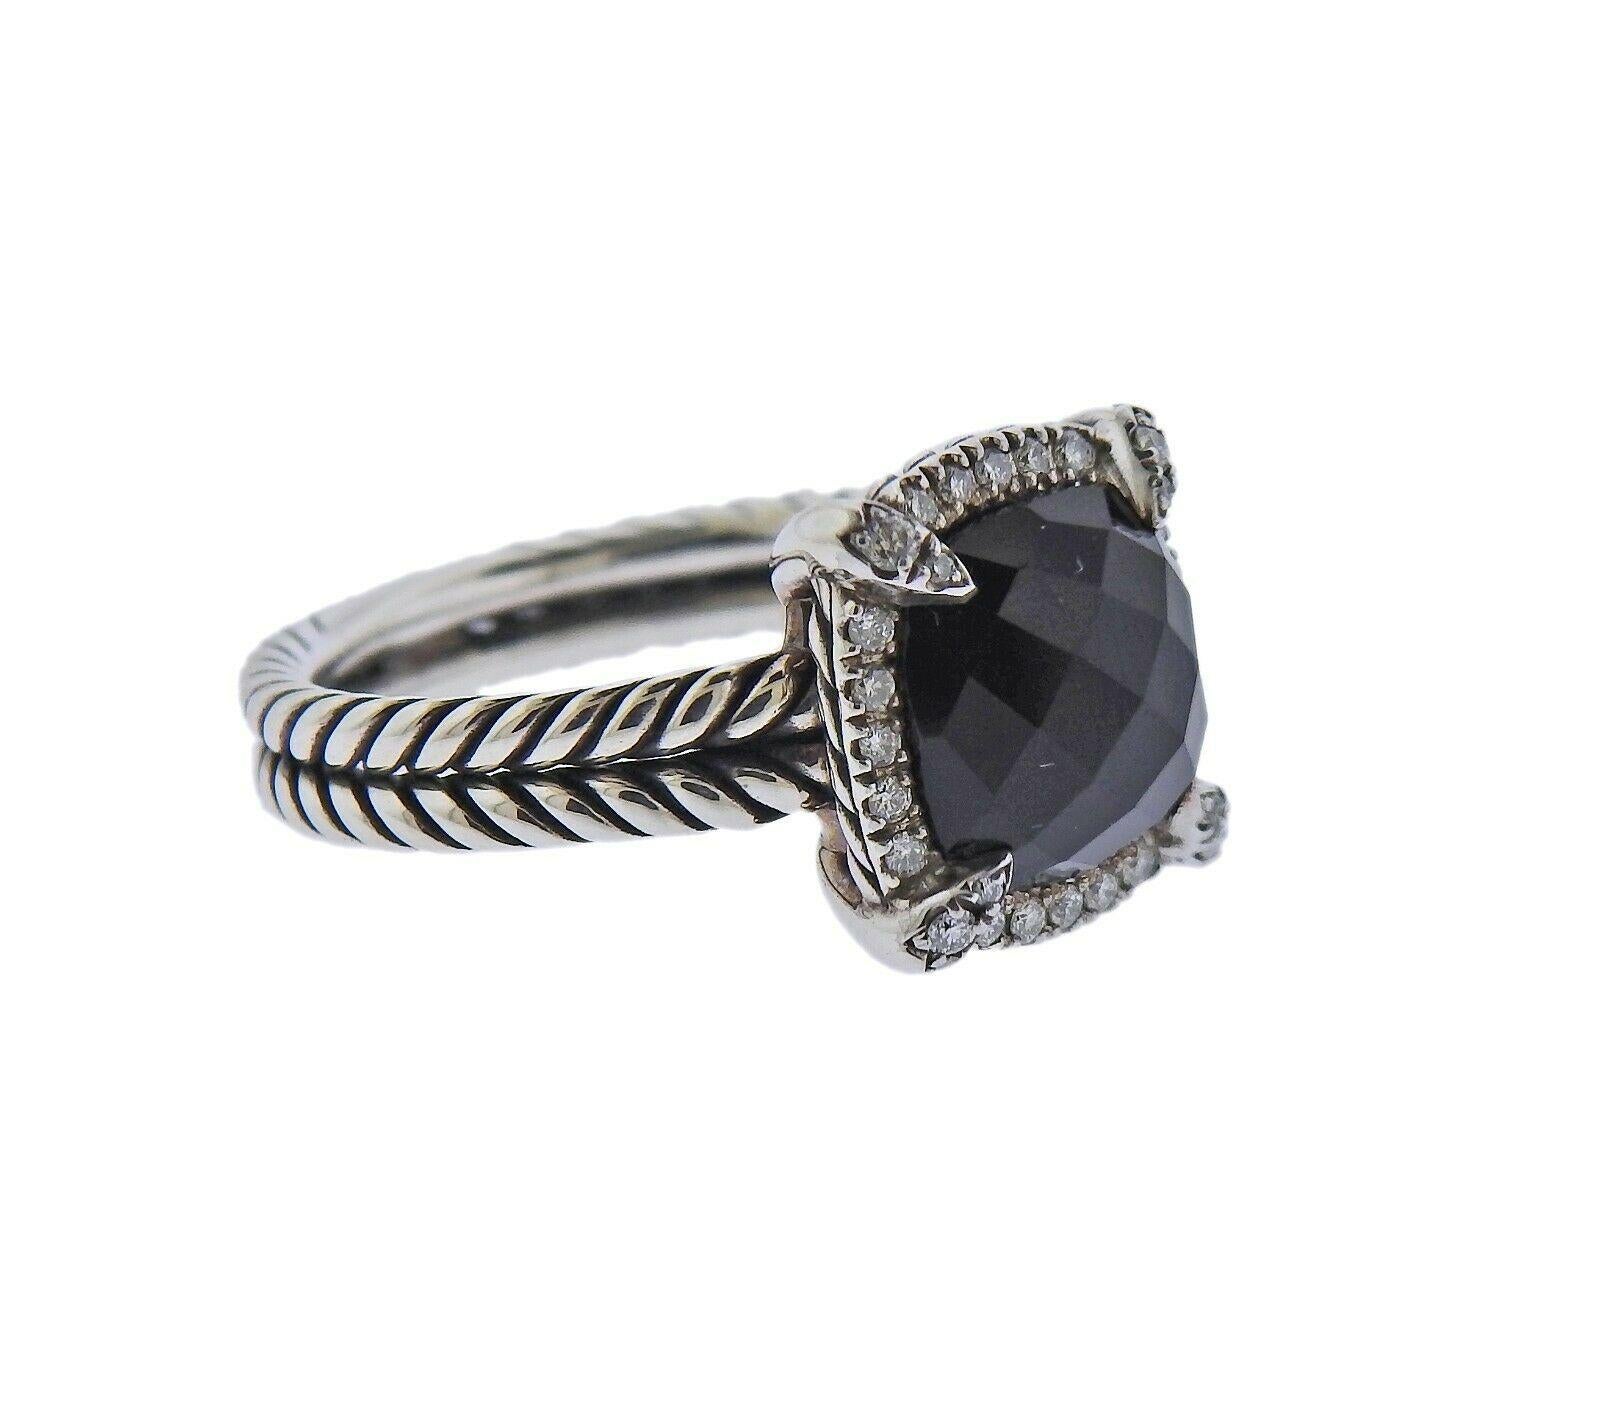 New sterling silver Chatelaine ring by David Yurman, with 9mm onyx and approx. 0.14ctw in diamonds. Retail $850. Size 6, black onyx 9mm wide.  Weight - 5.2 grams. Marked: D.Y., 925.